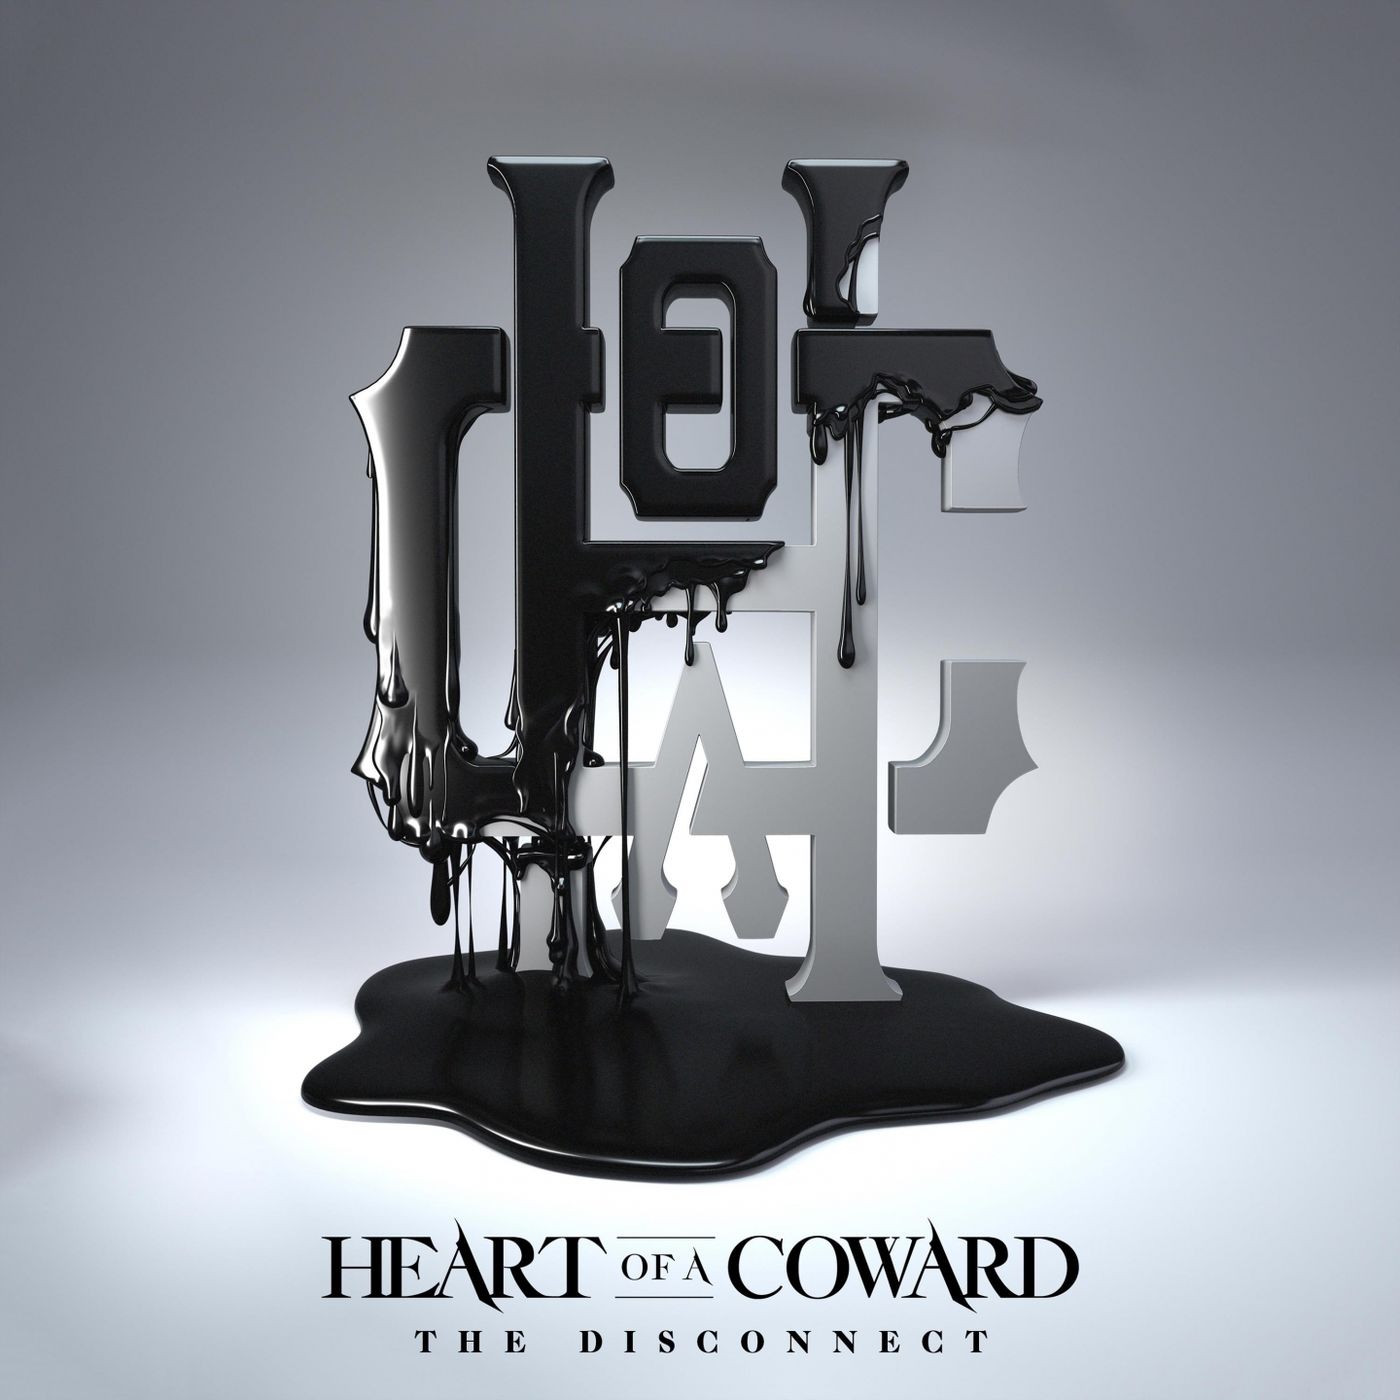 Heart of a Coward - The Disconnect (2019)